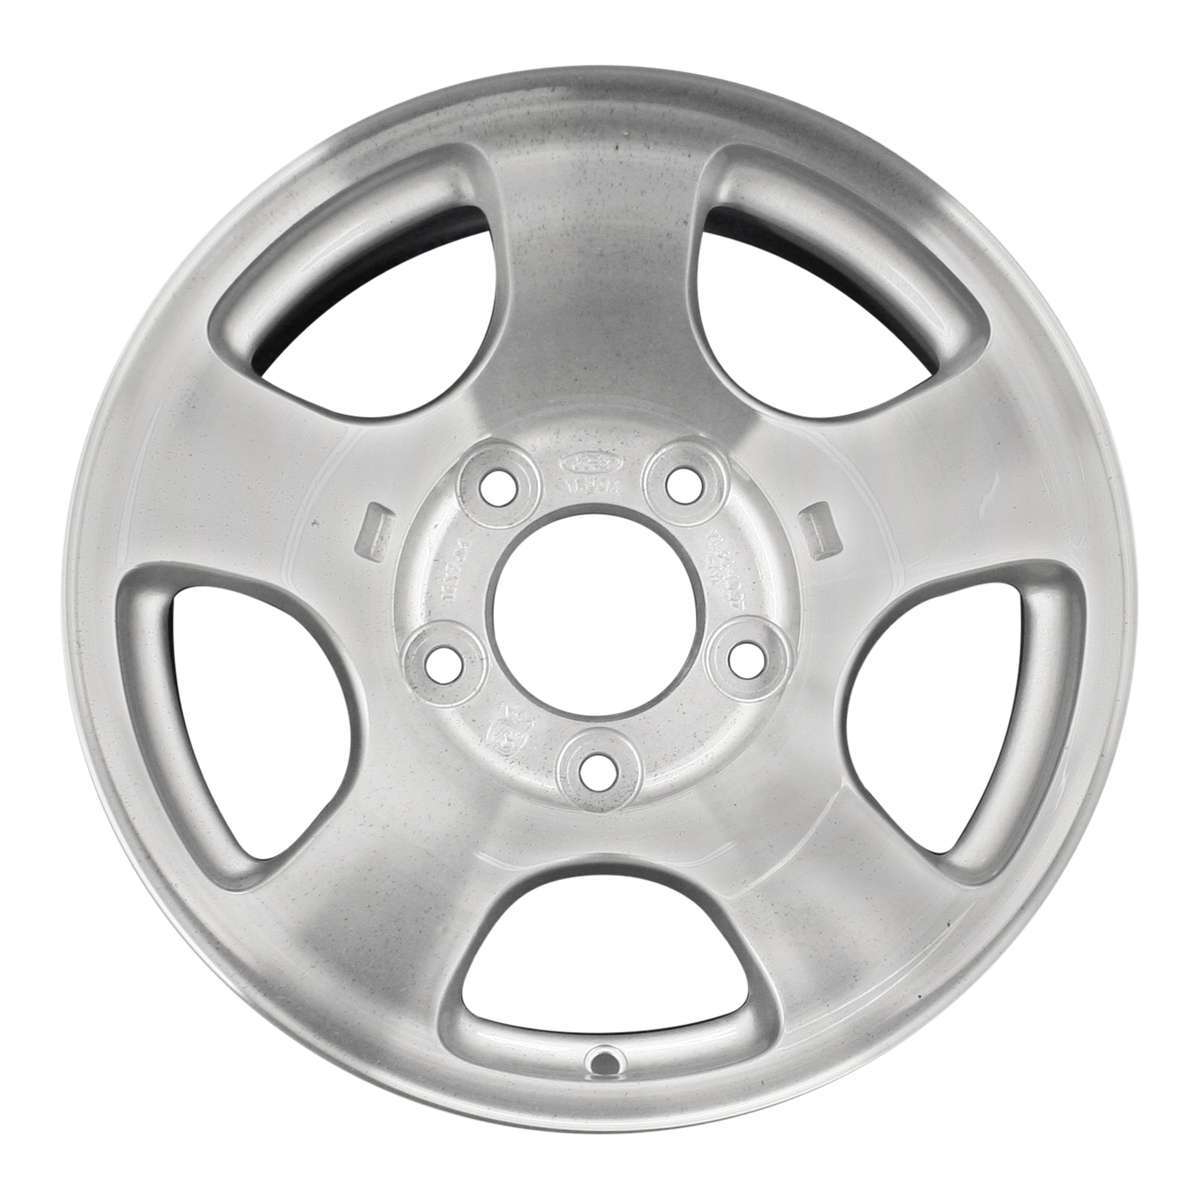 2000 Ford Expedition 16" OEM Wheel Rim W3400MS